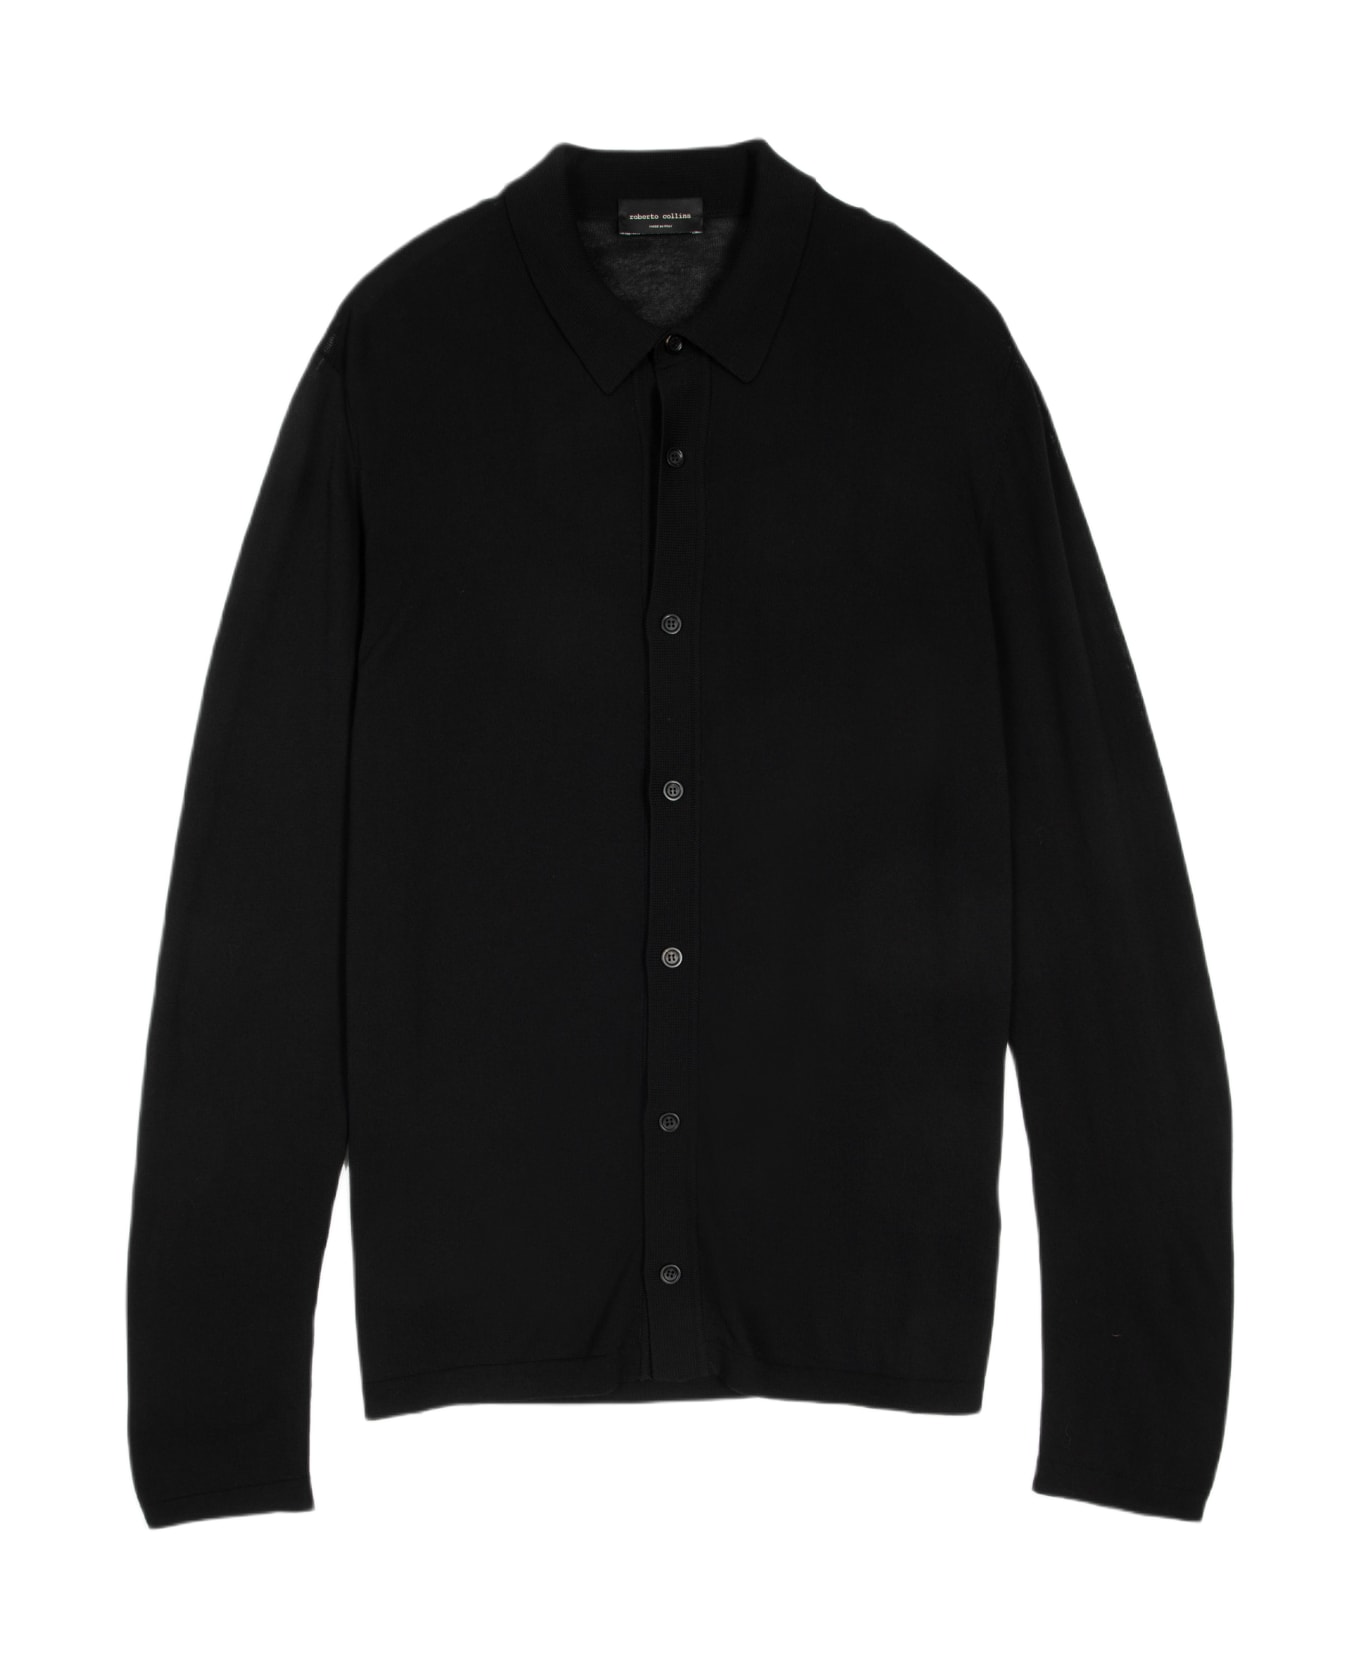 Roberto Collina Camicia Ml Black cotton knit shirt with long sleeves - Nero